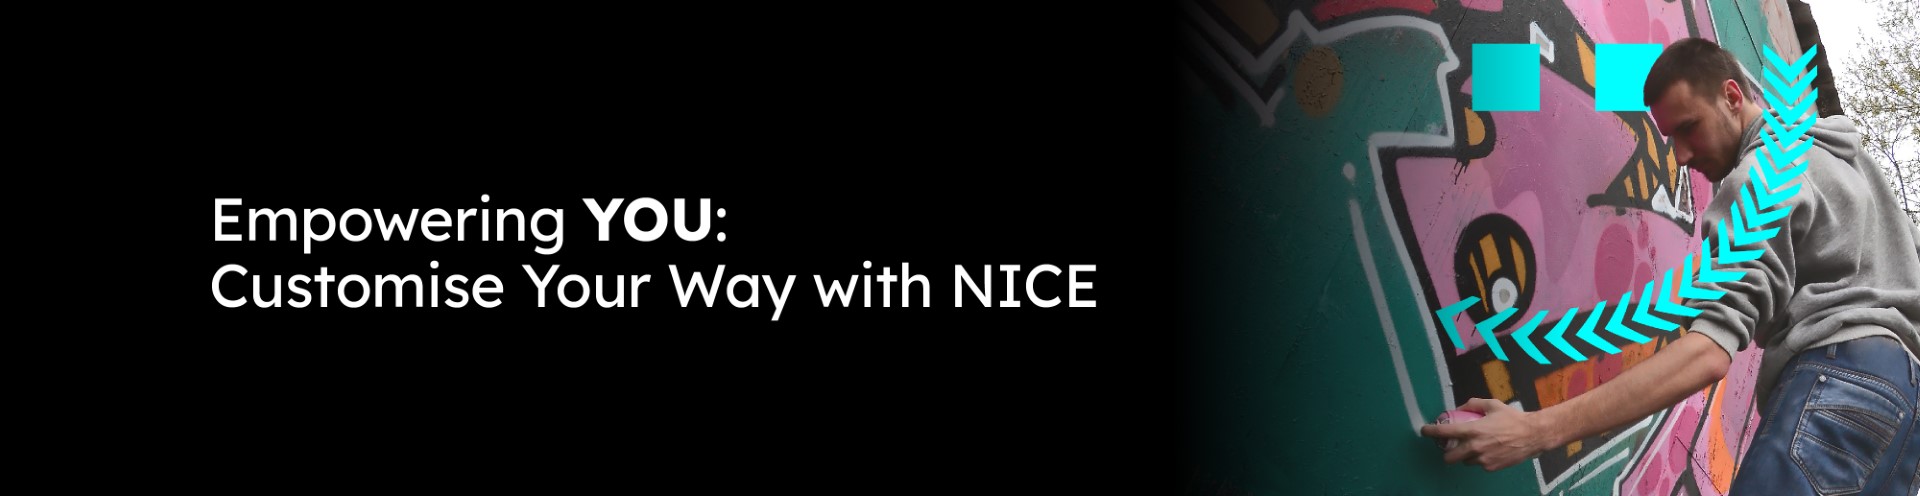 Empowering YOU: Customer Your Way with NICE